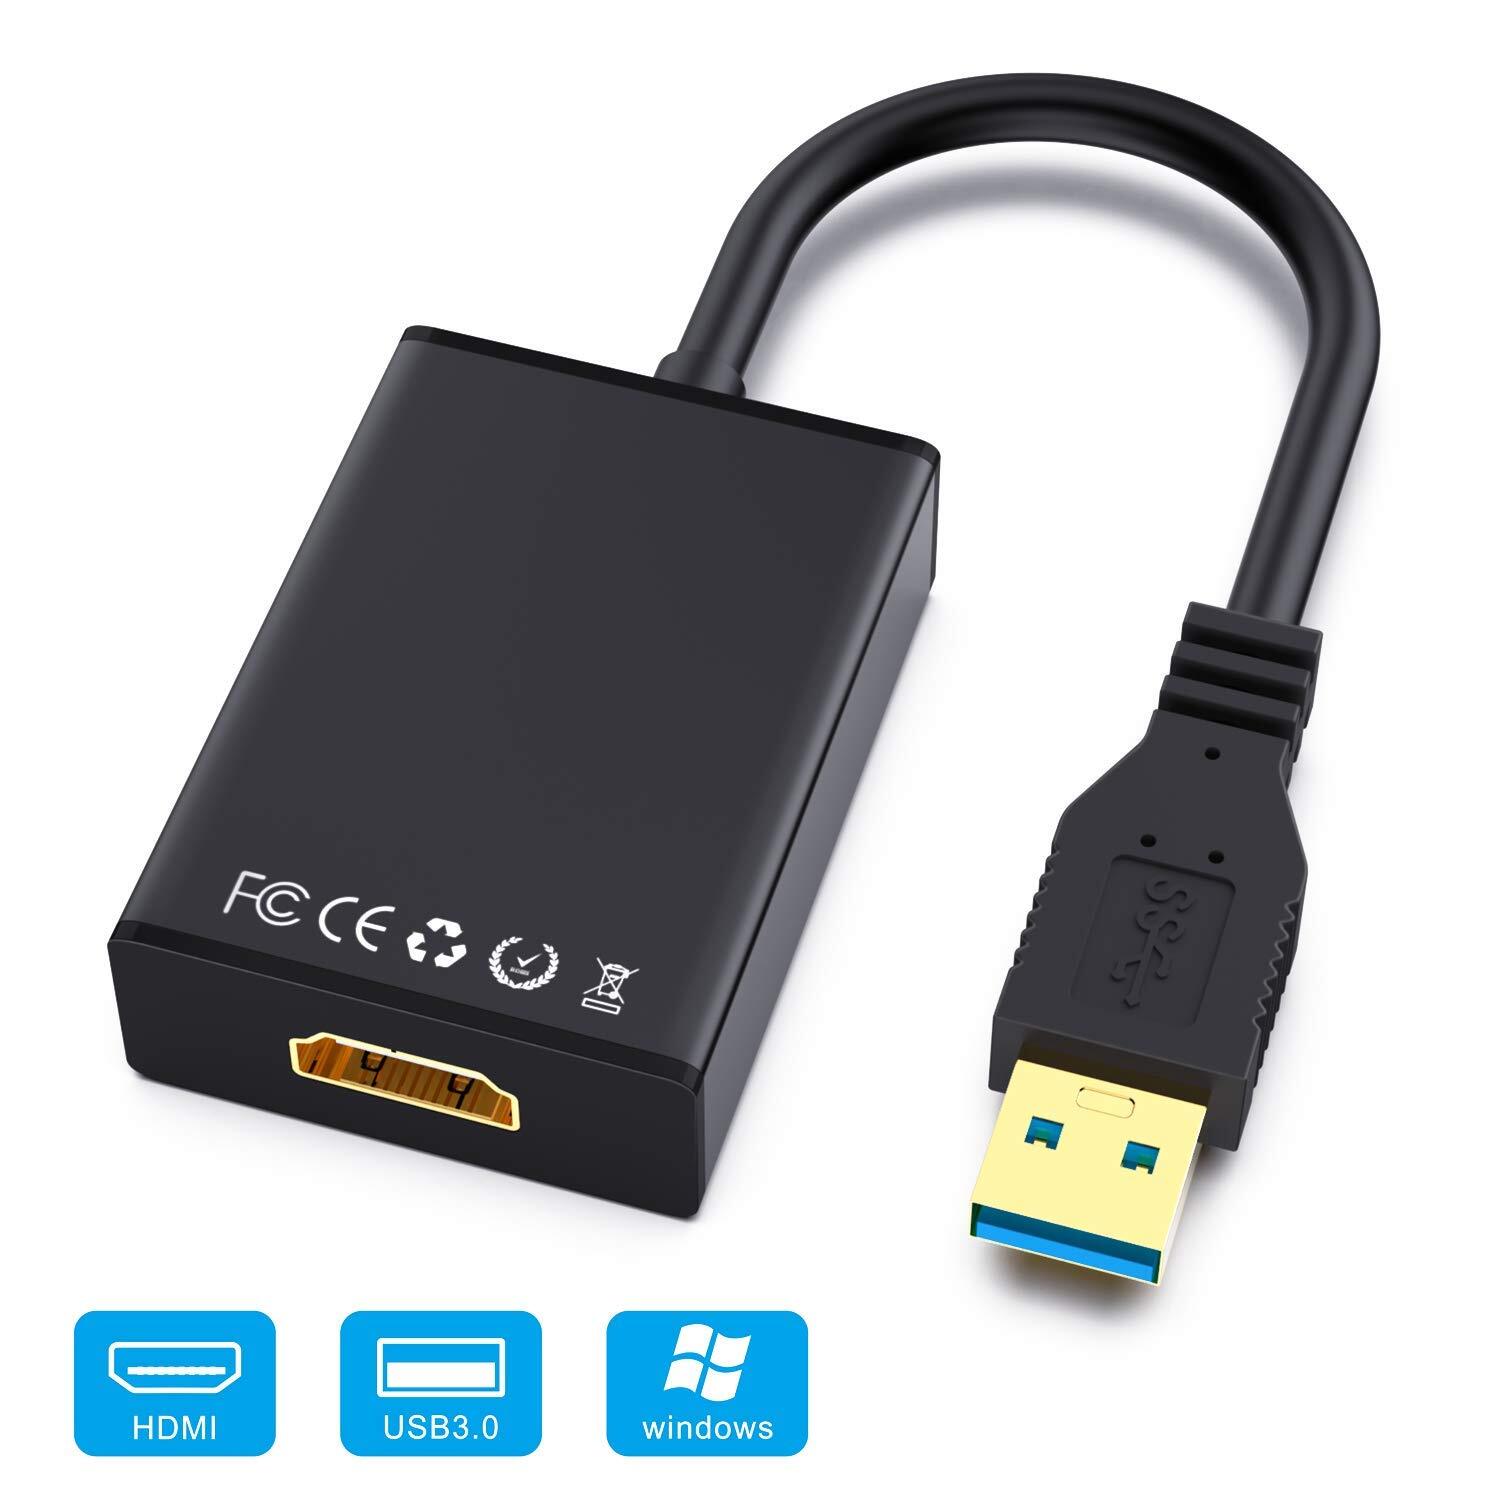 ablewe usb 3.0 to hdmi adapter driver download